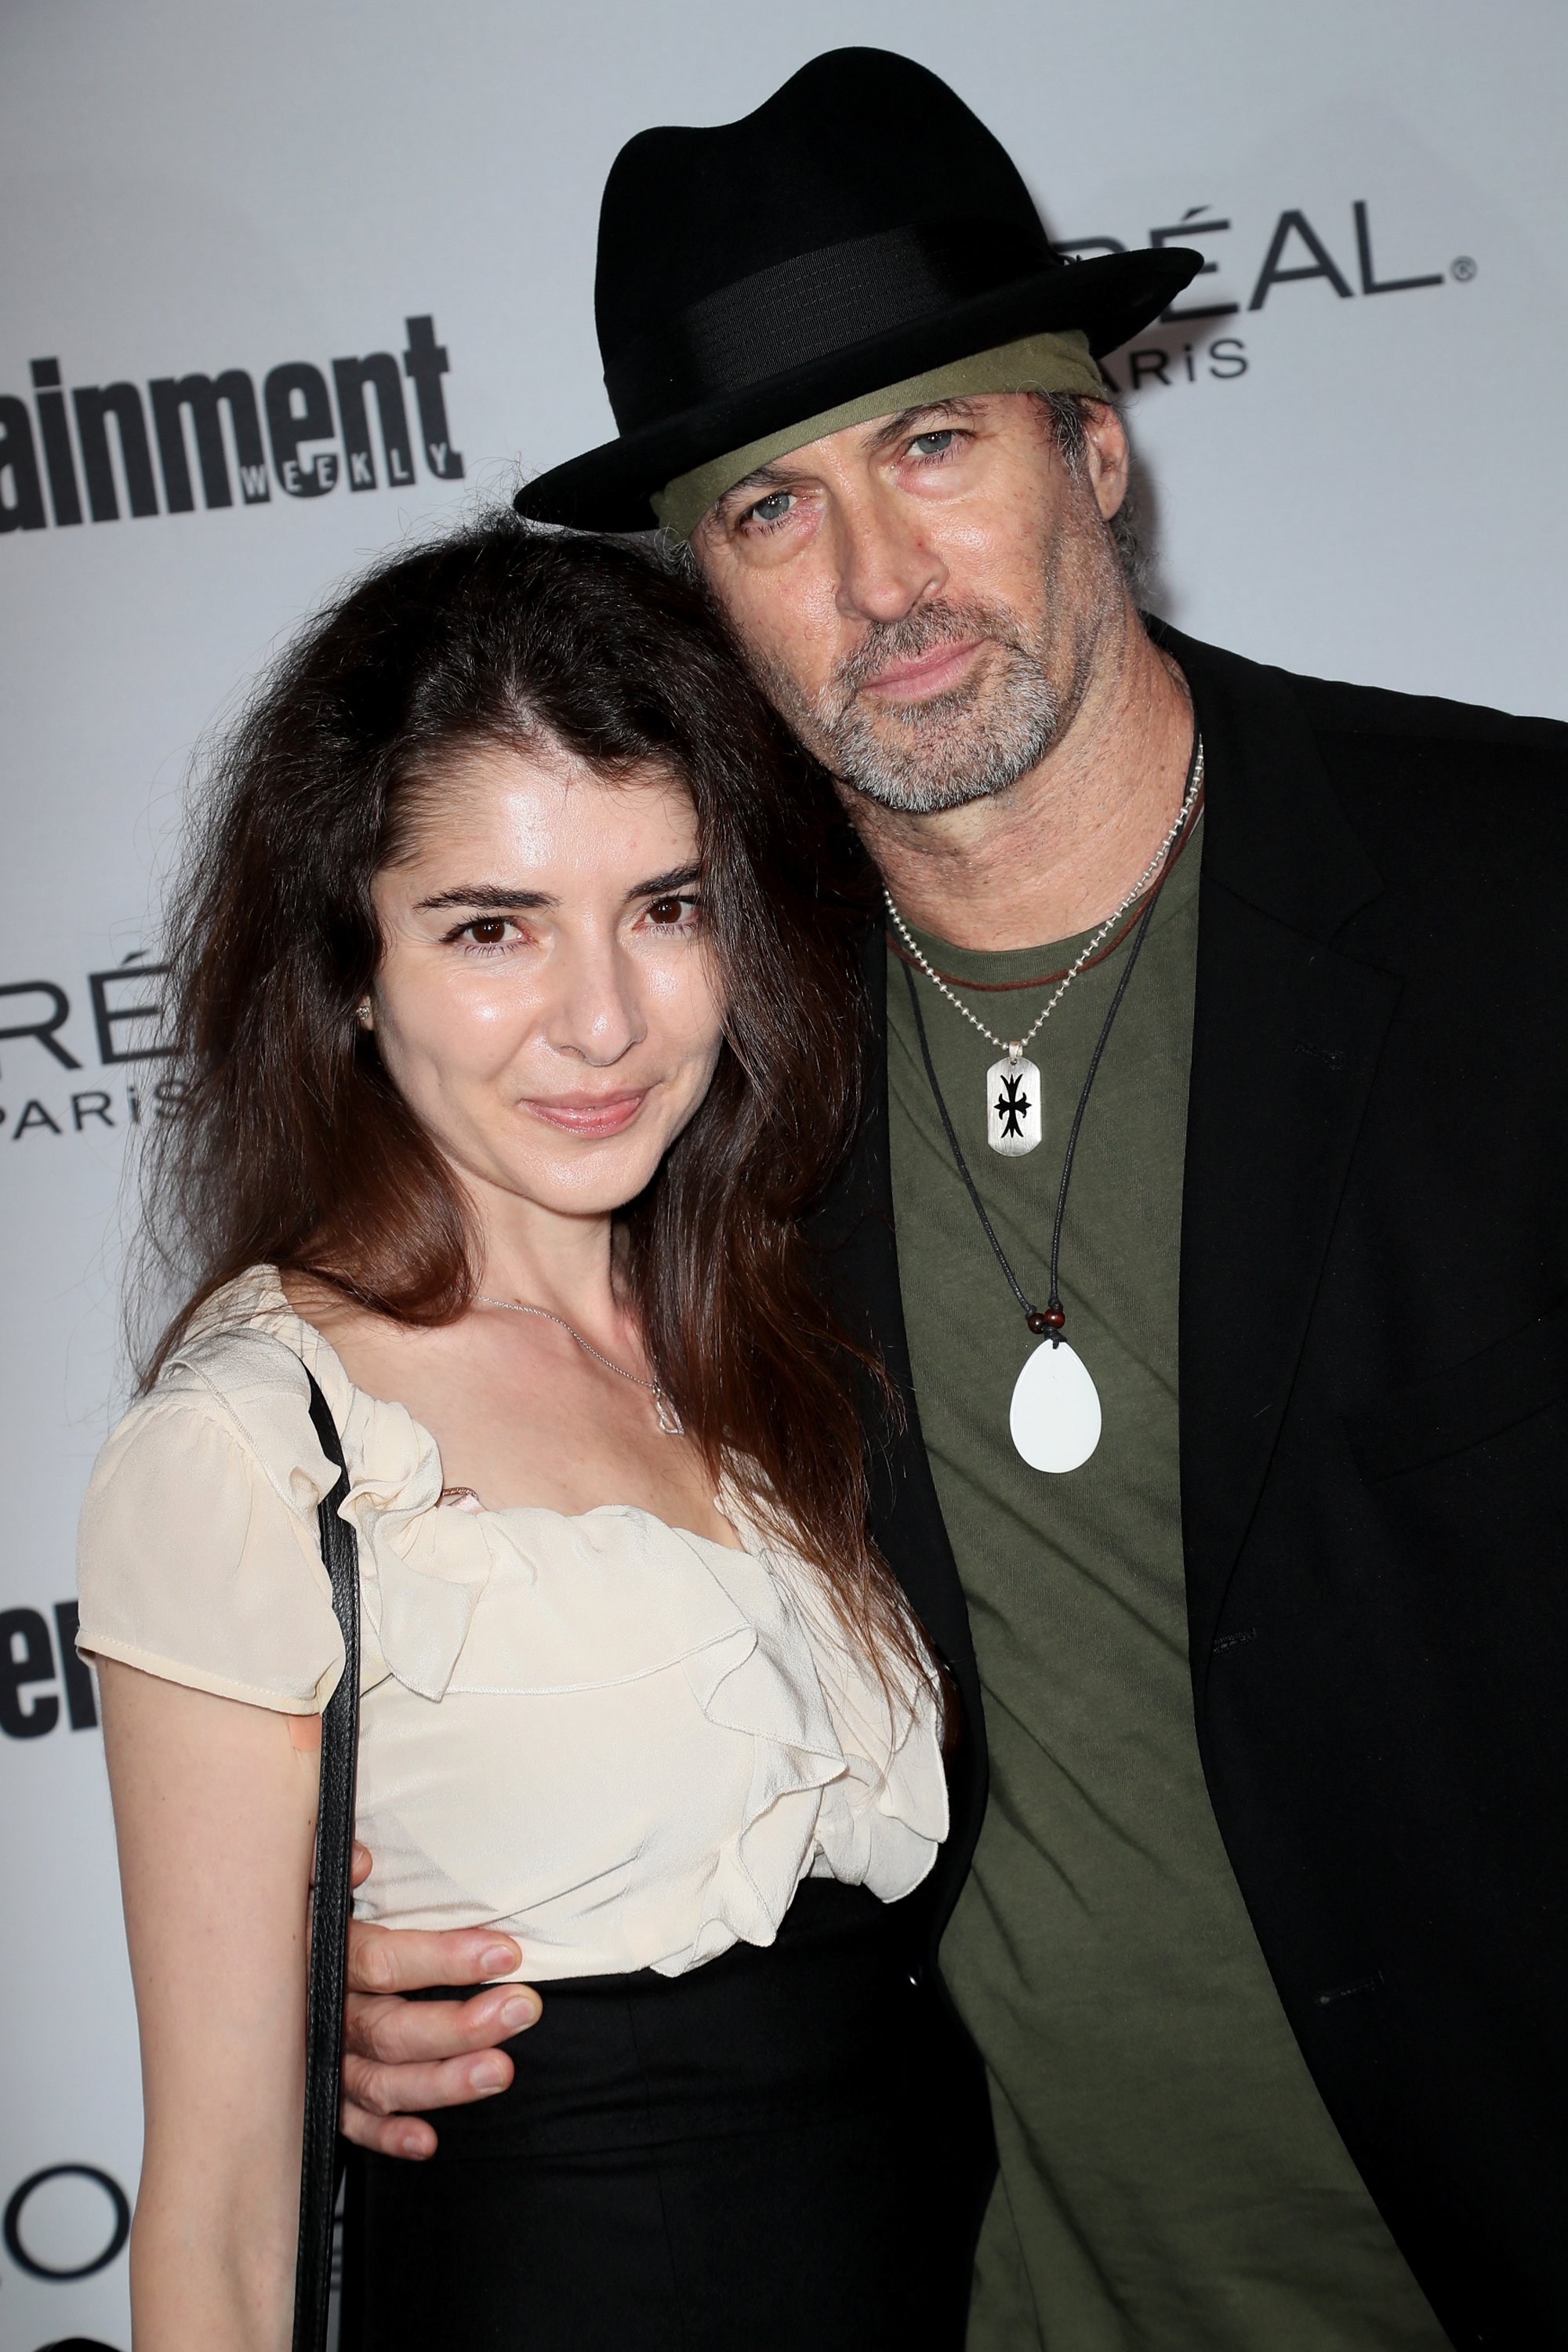 Kristine Saryan and Scott Patterson at the Entertainment Weekly's 2016 Pre-Emmy Party at Nightingale Plaza on September 16, 2016, in Los Angeles, California. | Source: Getty Images